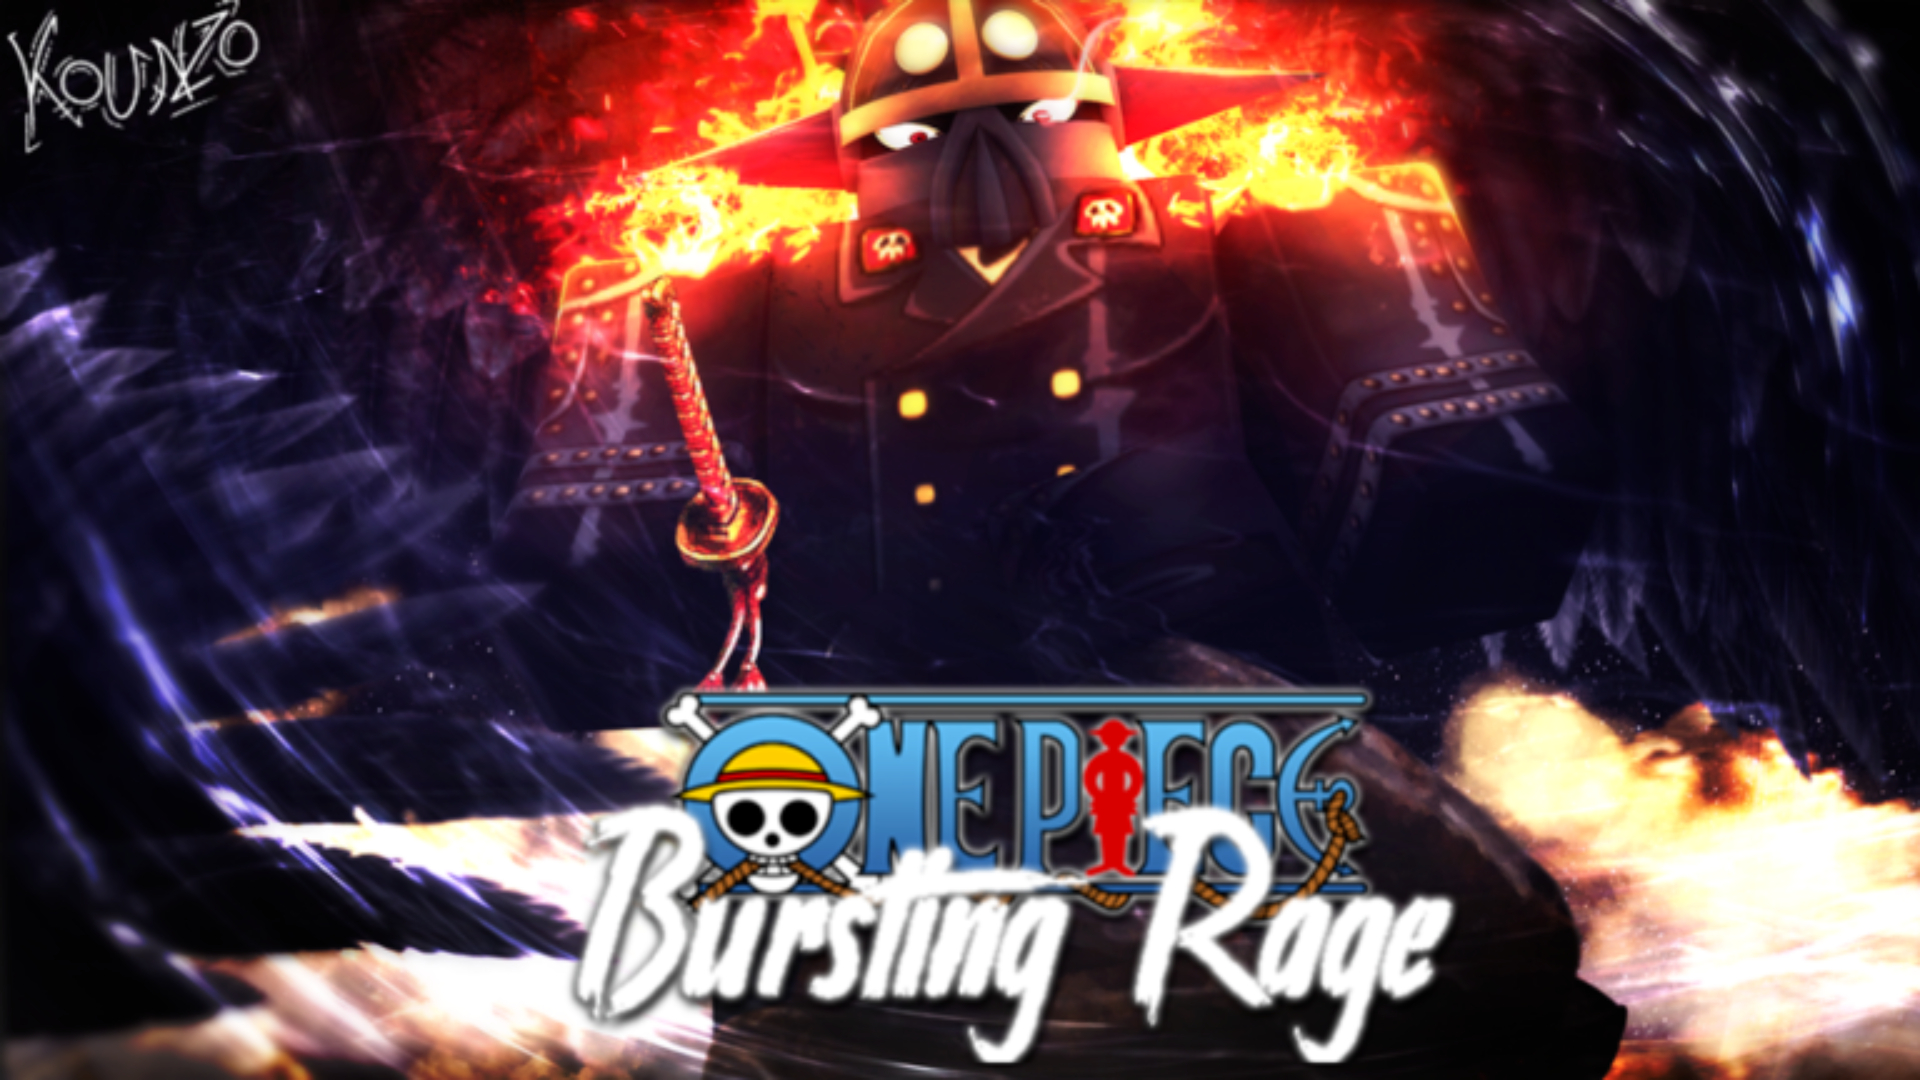 Project Bursting Rage codes – resets and beli